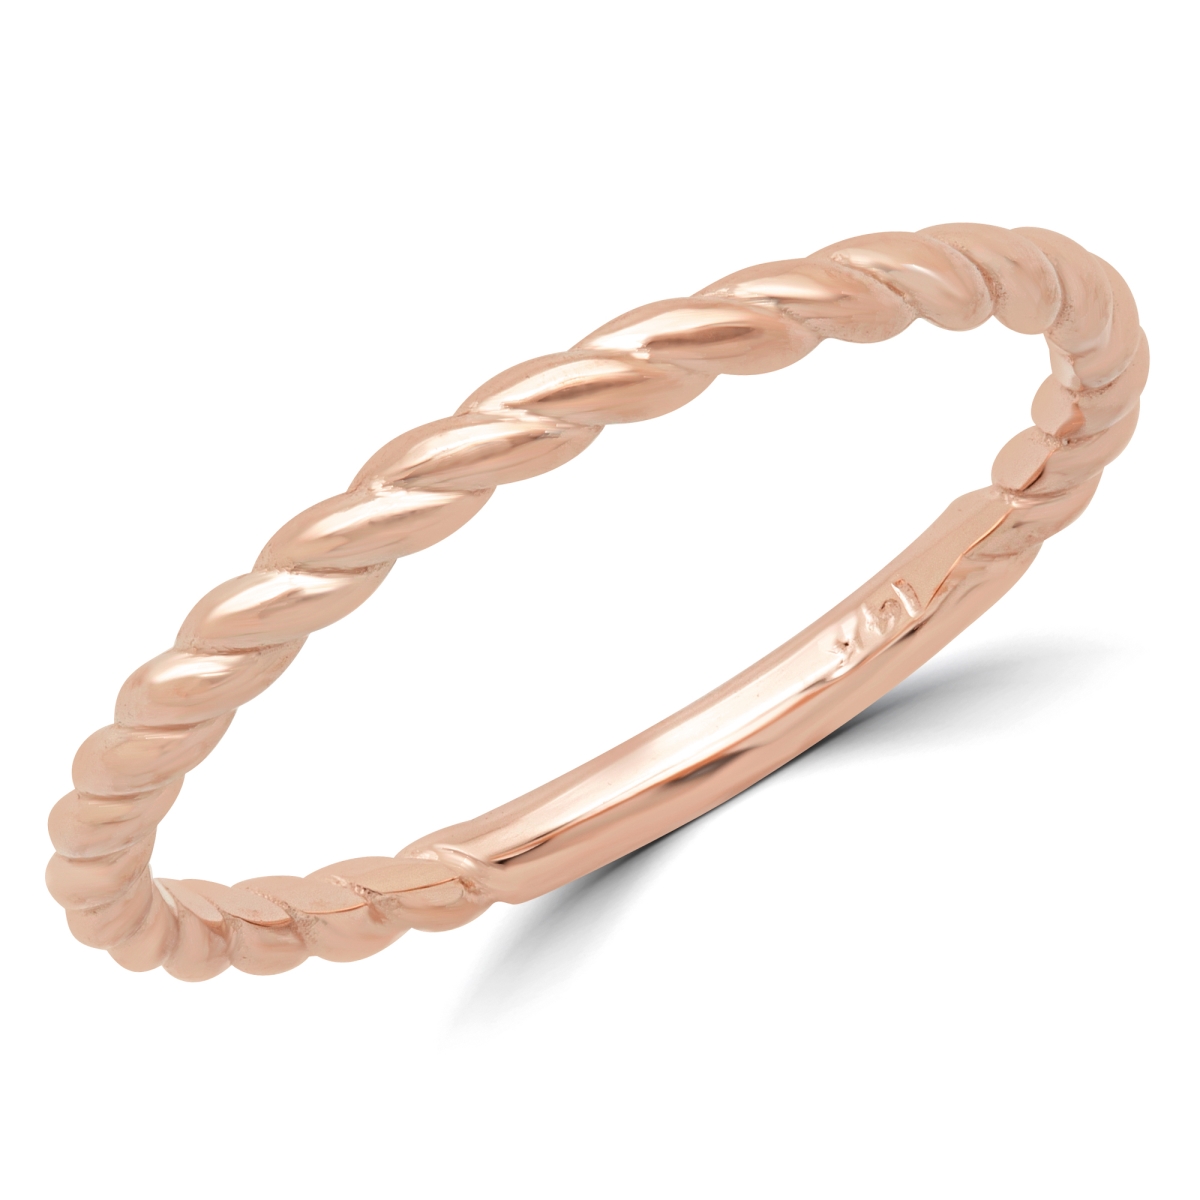 Picture of Majesty Diamonds MD180603-3.5 Braided Rope Classic Wedding Band Ring in 14K Rose Gold - Size 3.5